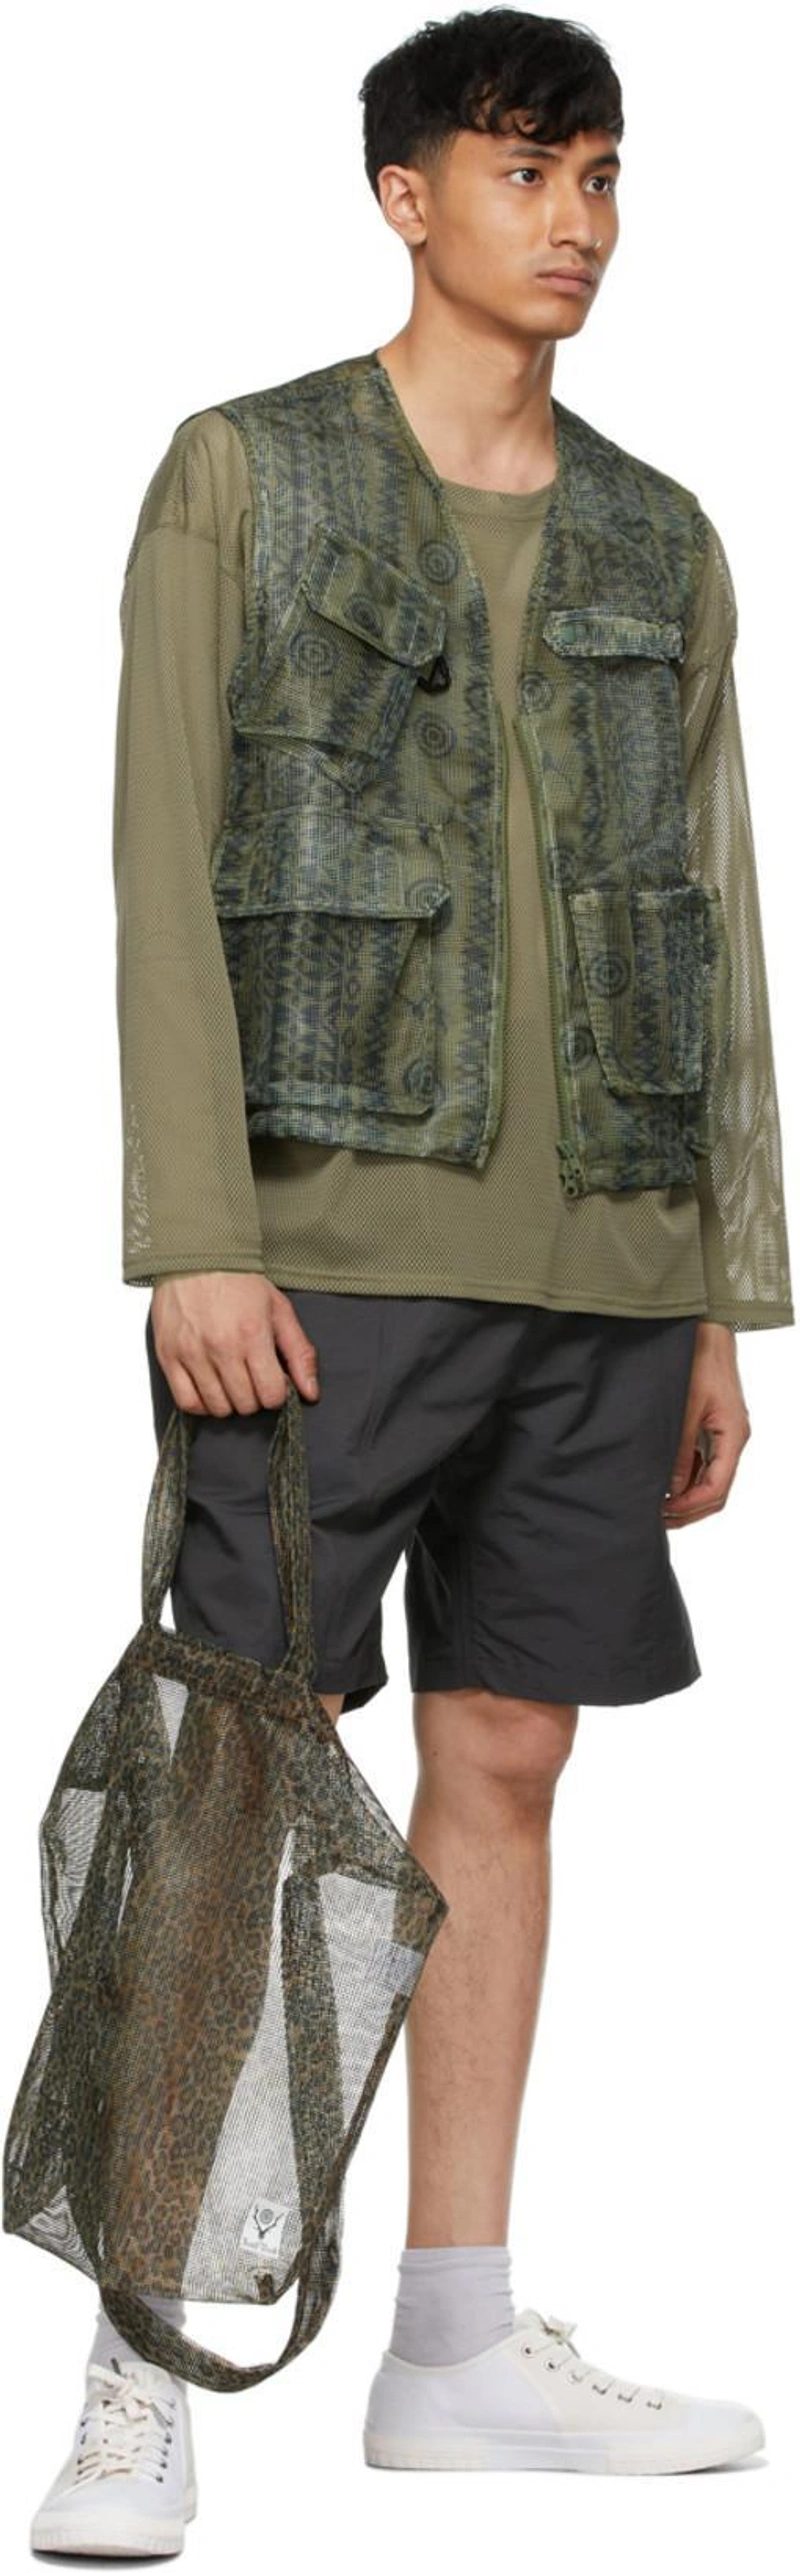 SSENSE's Post | Wearing: South2 West8 Khaki Mesh Sweater In Olive; South2 West8 Khaki Skull & Target Bush Trek Vest In Skulltarget; South2 West8 Grey Belted Center Seam Shorts In Charcoal